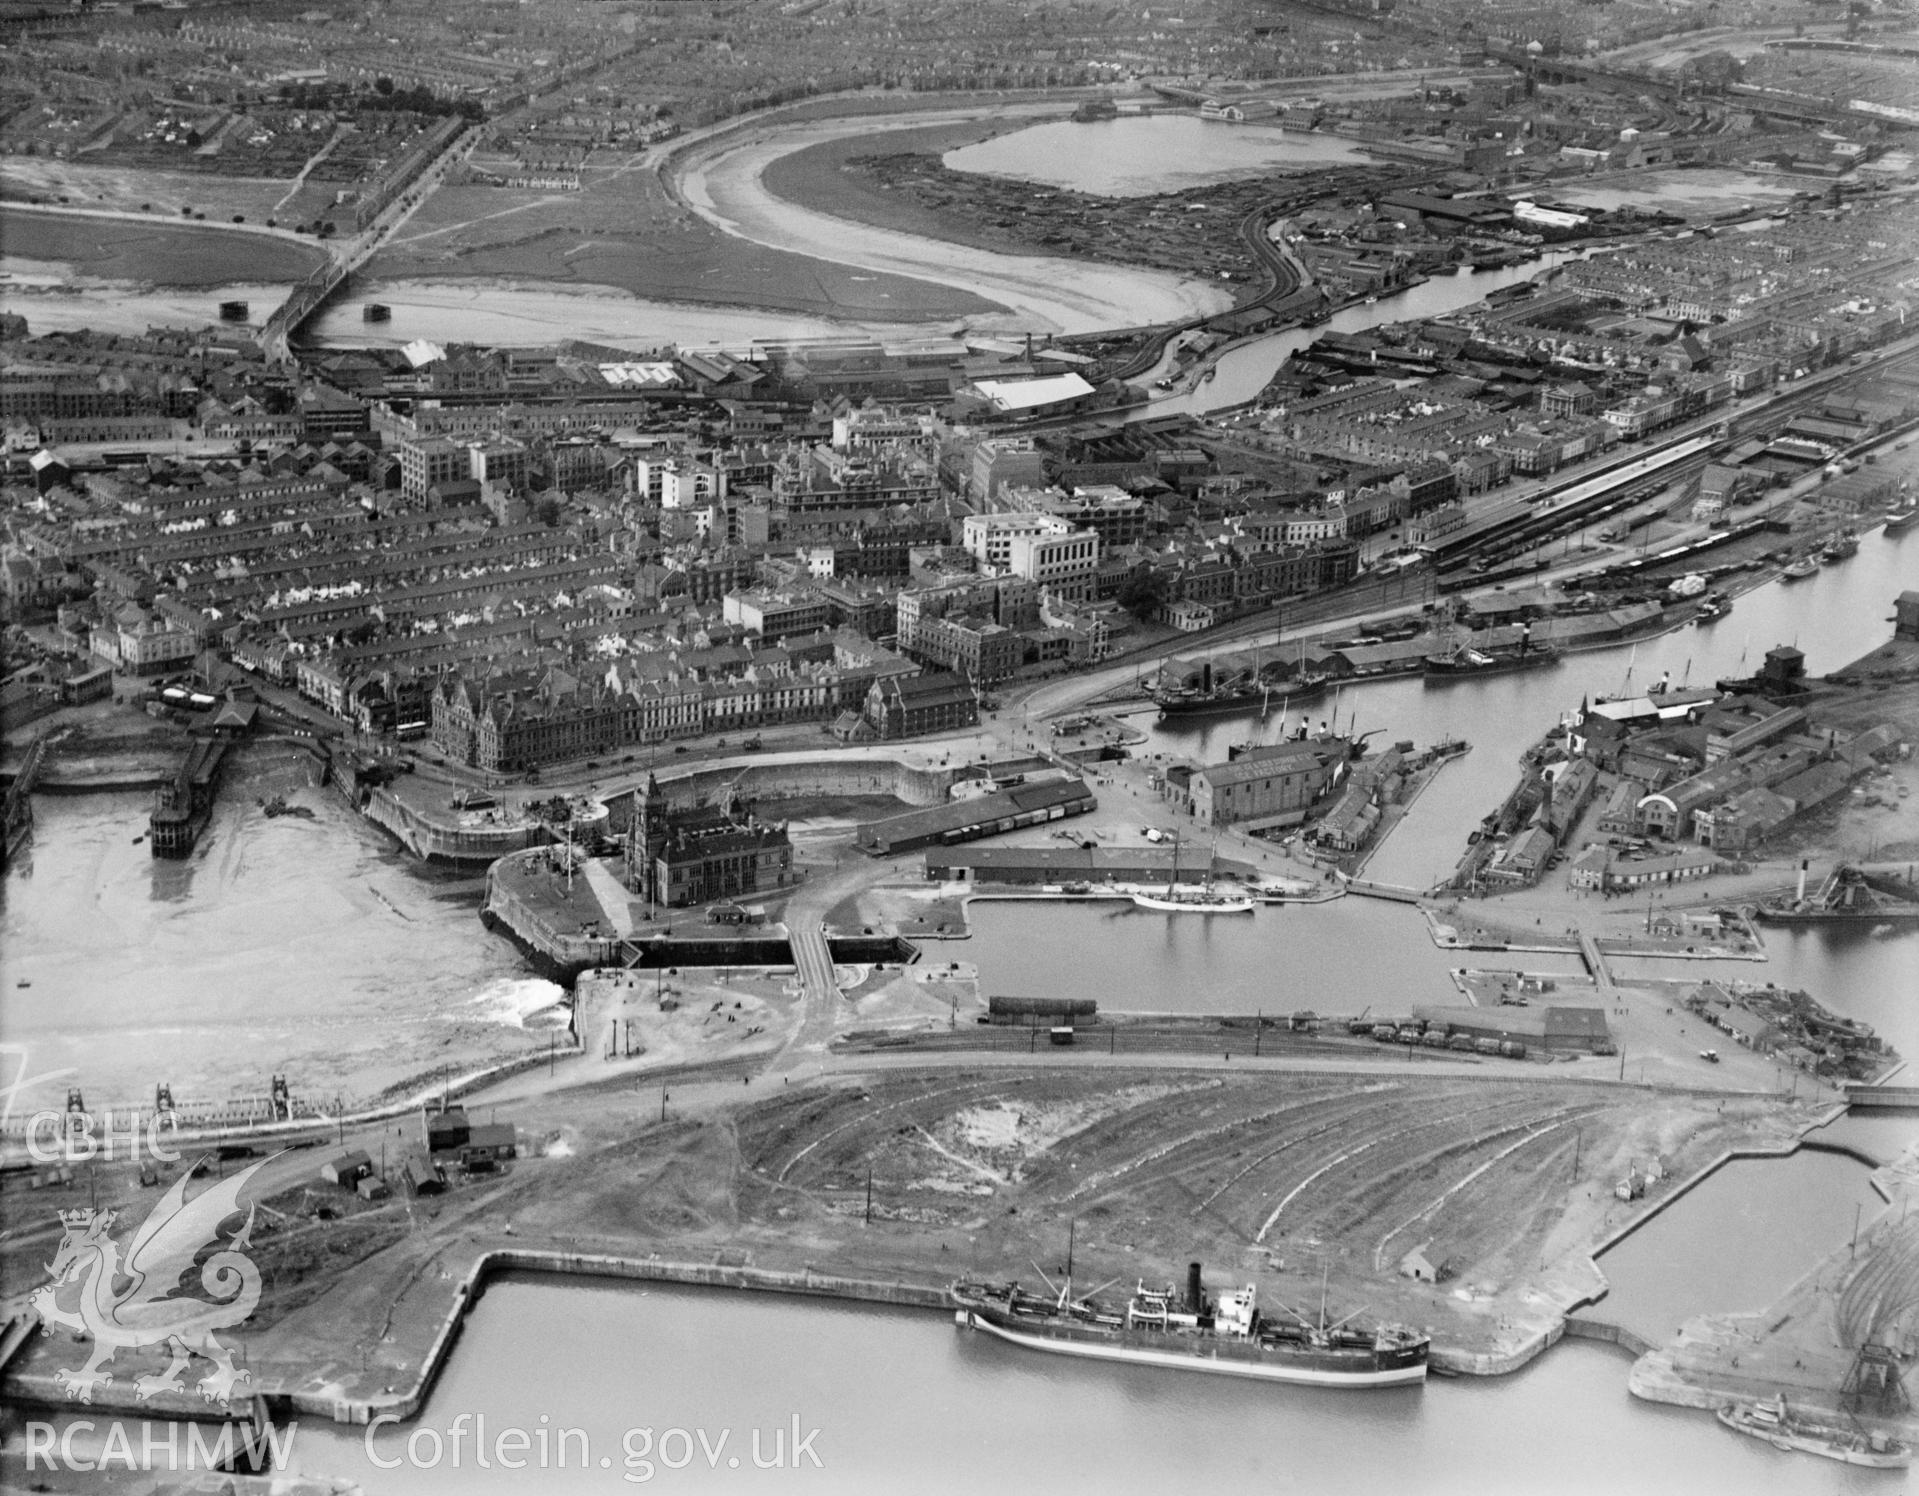 Butetown, Cardiff, showing docks, oblique aerial view. 5?x4? black and white glass plate negative.